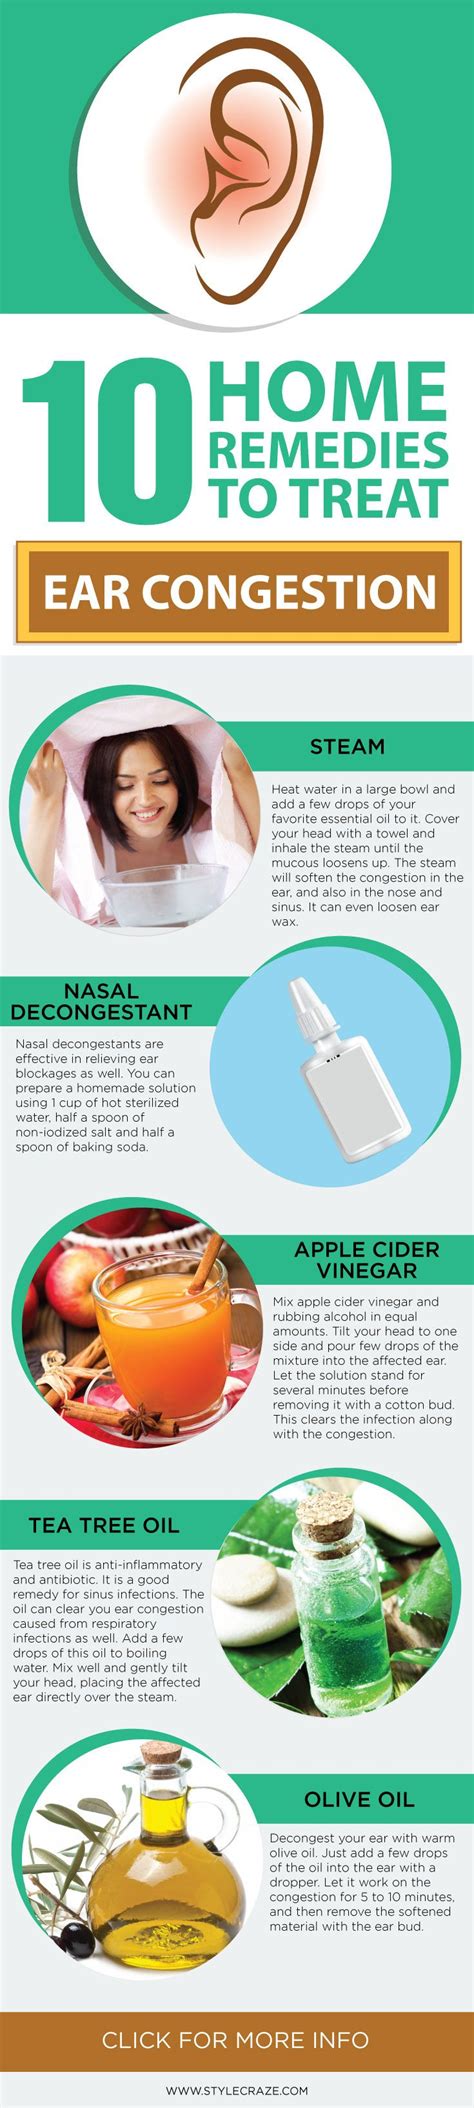 9 Home Remedies For Clogged Ears Ear Congestion Natural Cough